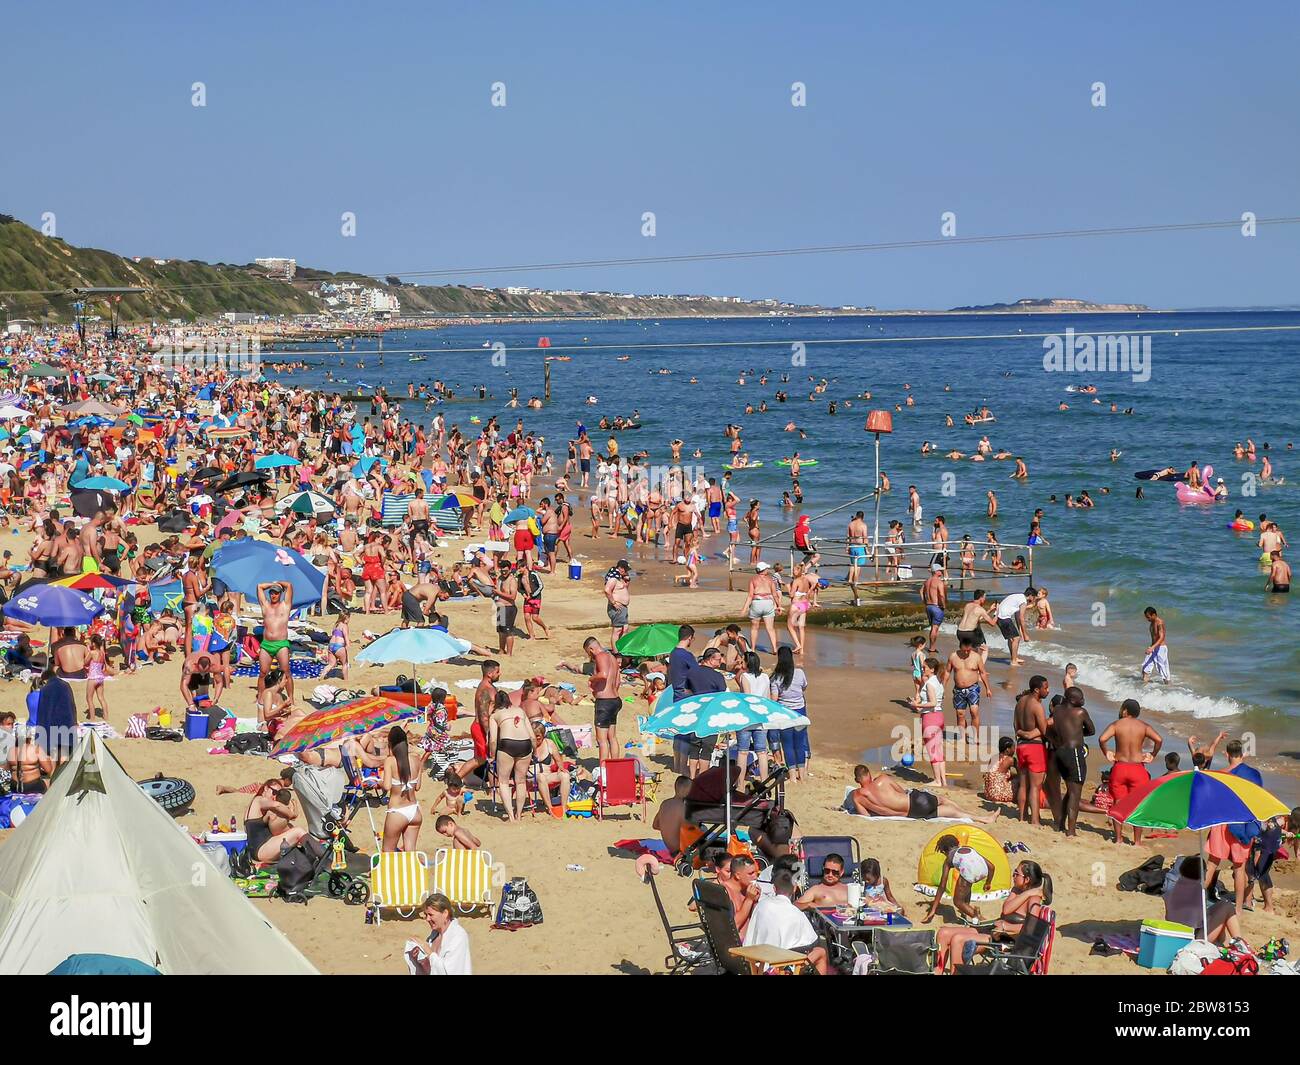 Bournemouth, UK. 30th May 2020. Bournemouth, UK.  Thousands of people descend on Bournemouth beach, many ignoring social distancing rules and crowding the beach and sea. Credit: Thomas Faull/Alamy Live News Stock Photo